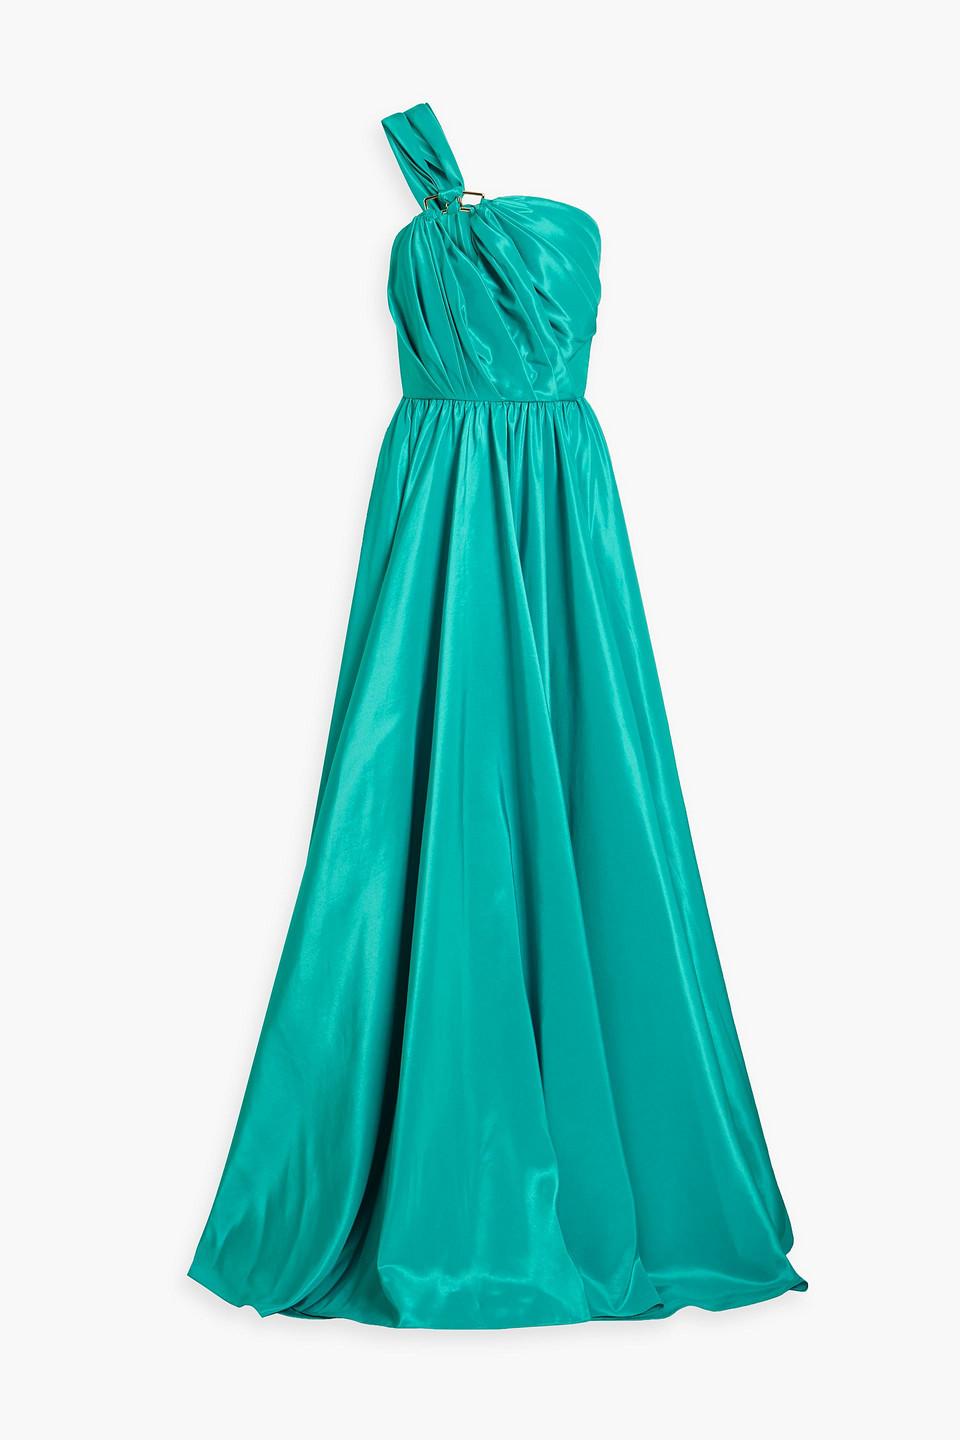 RHEA COSTA Bead-embellished ruched jersey gown